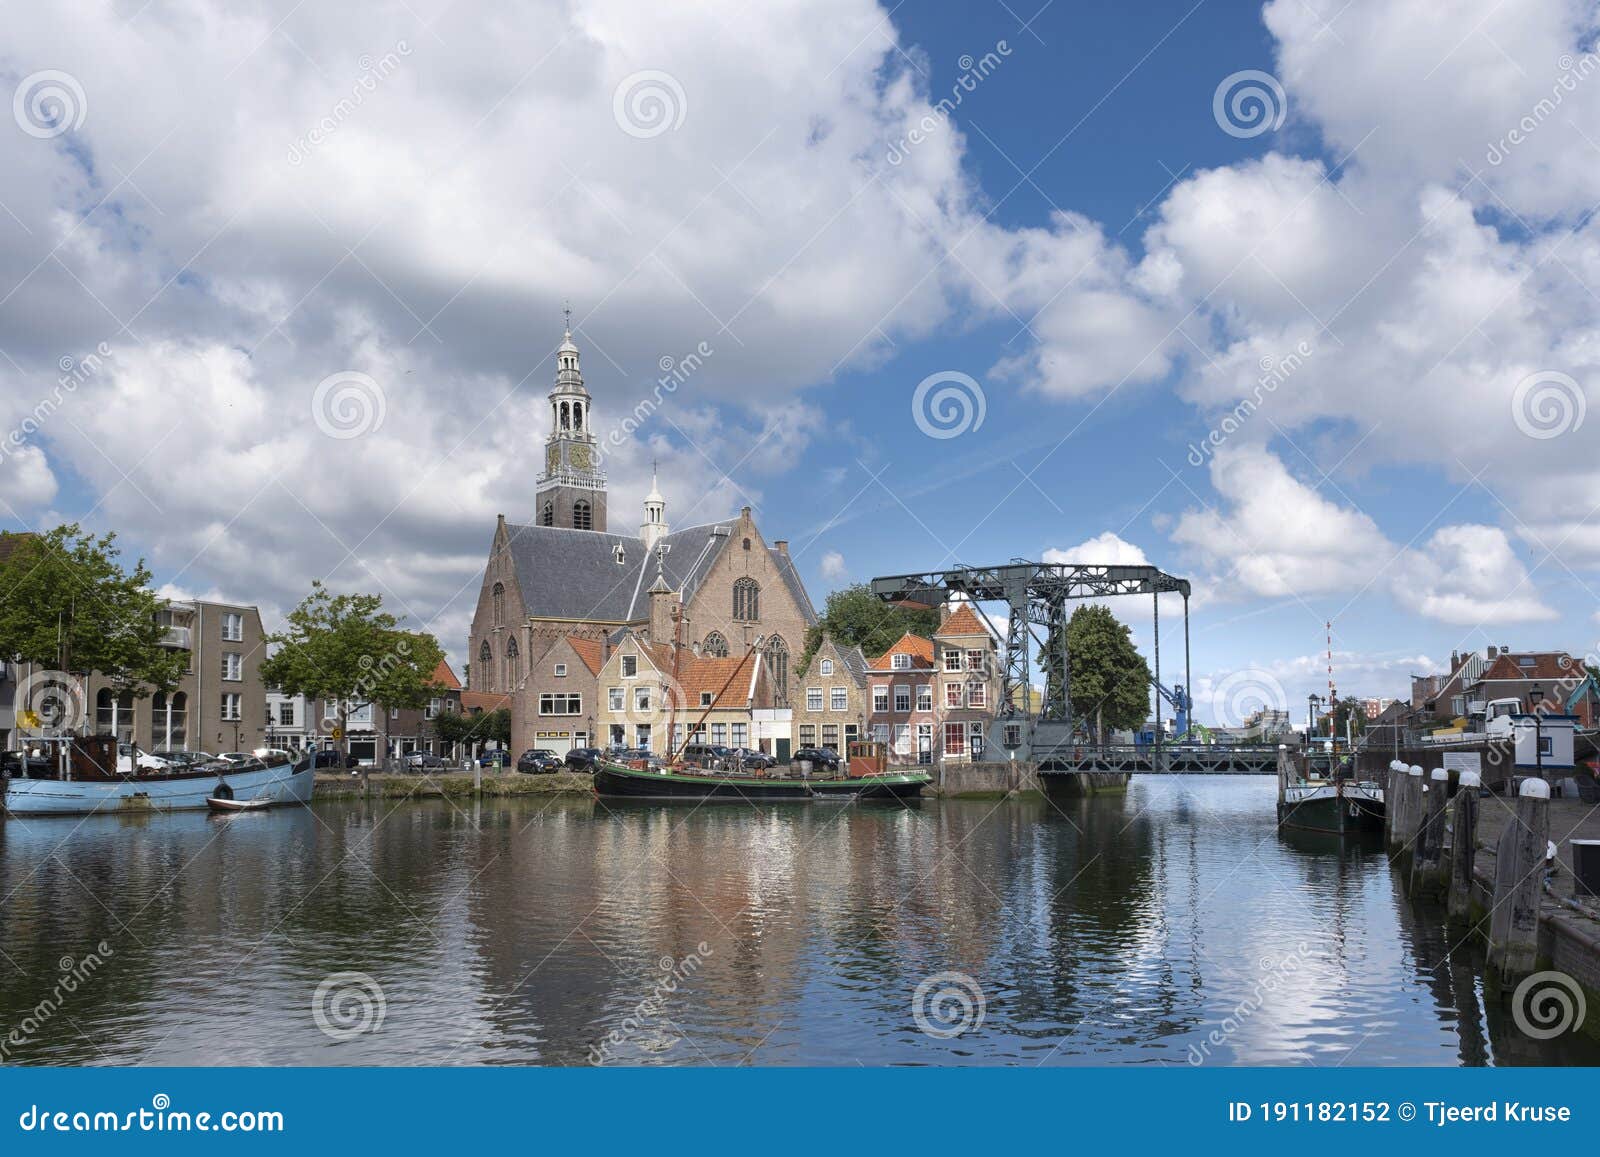 view on the marnixkade and the groote kerk, maassluis, holland